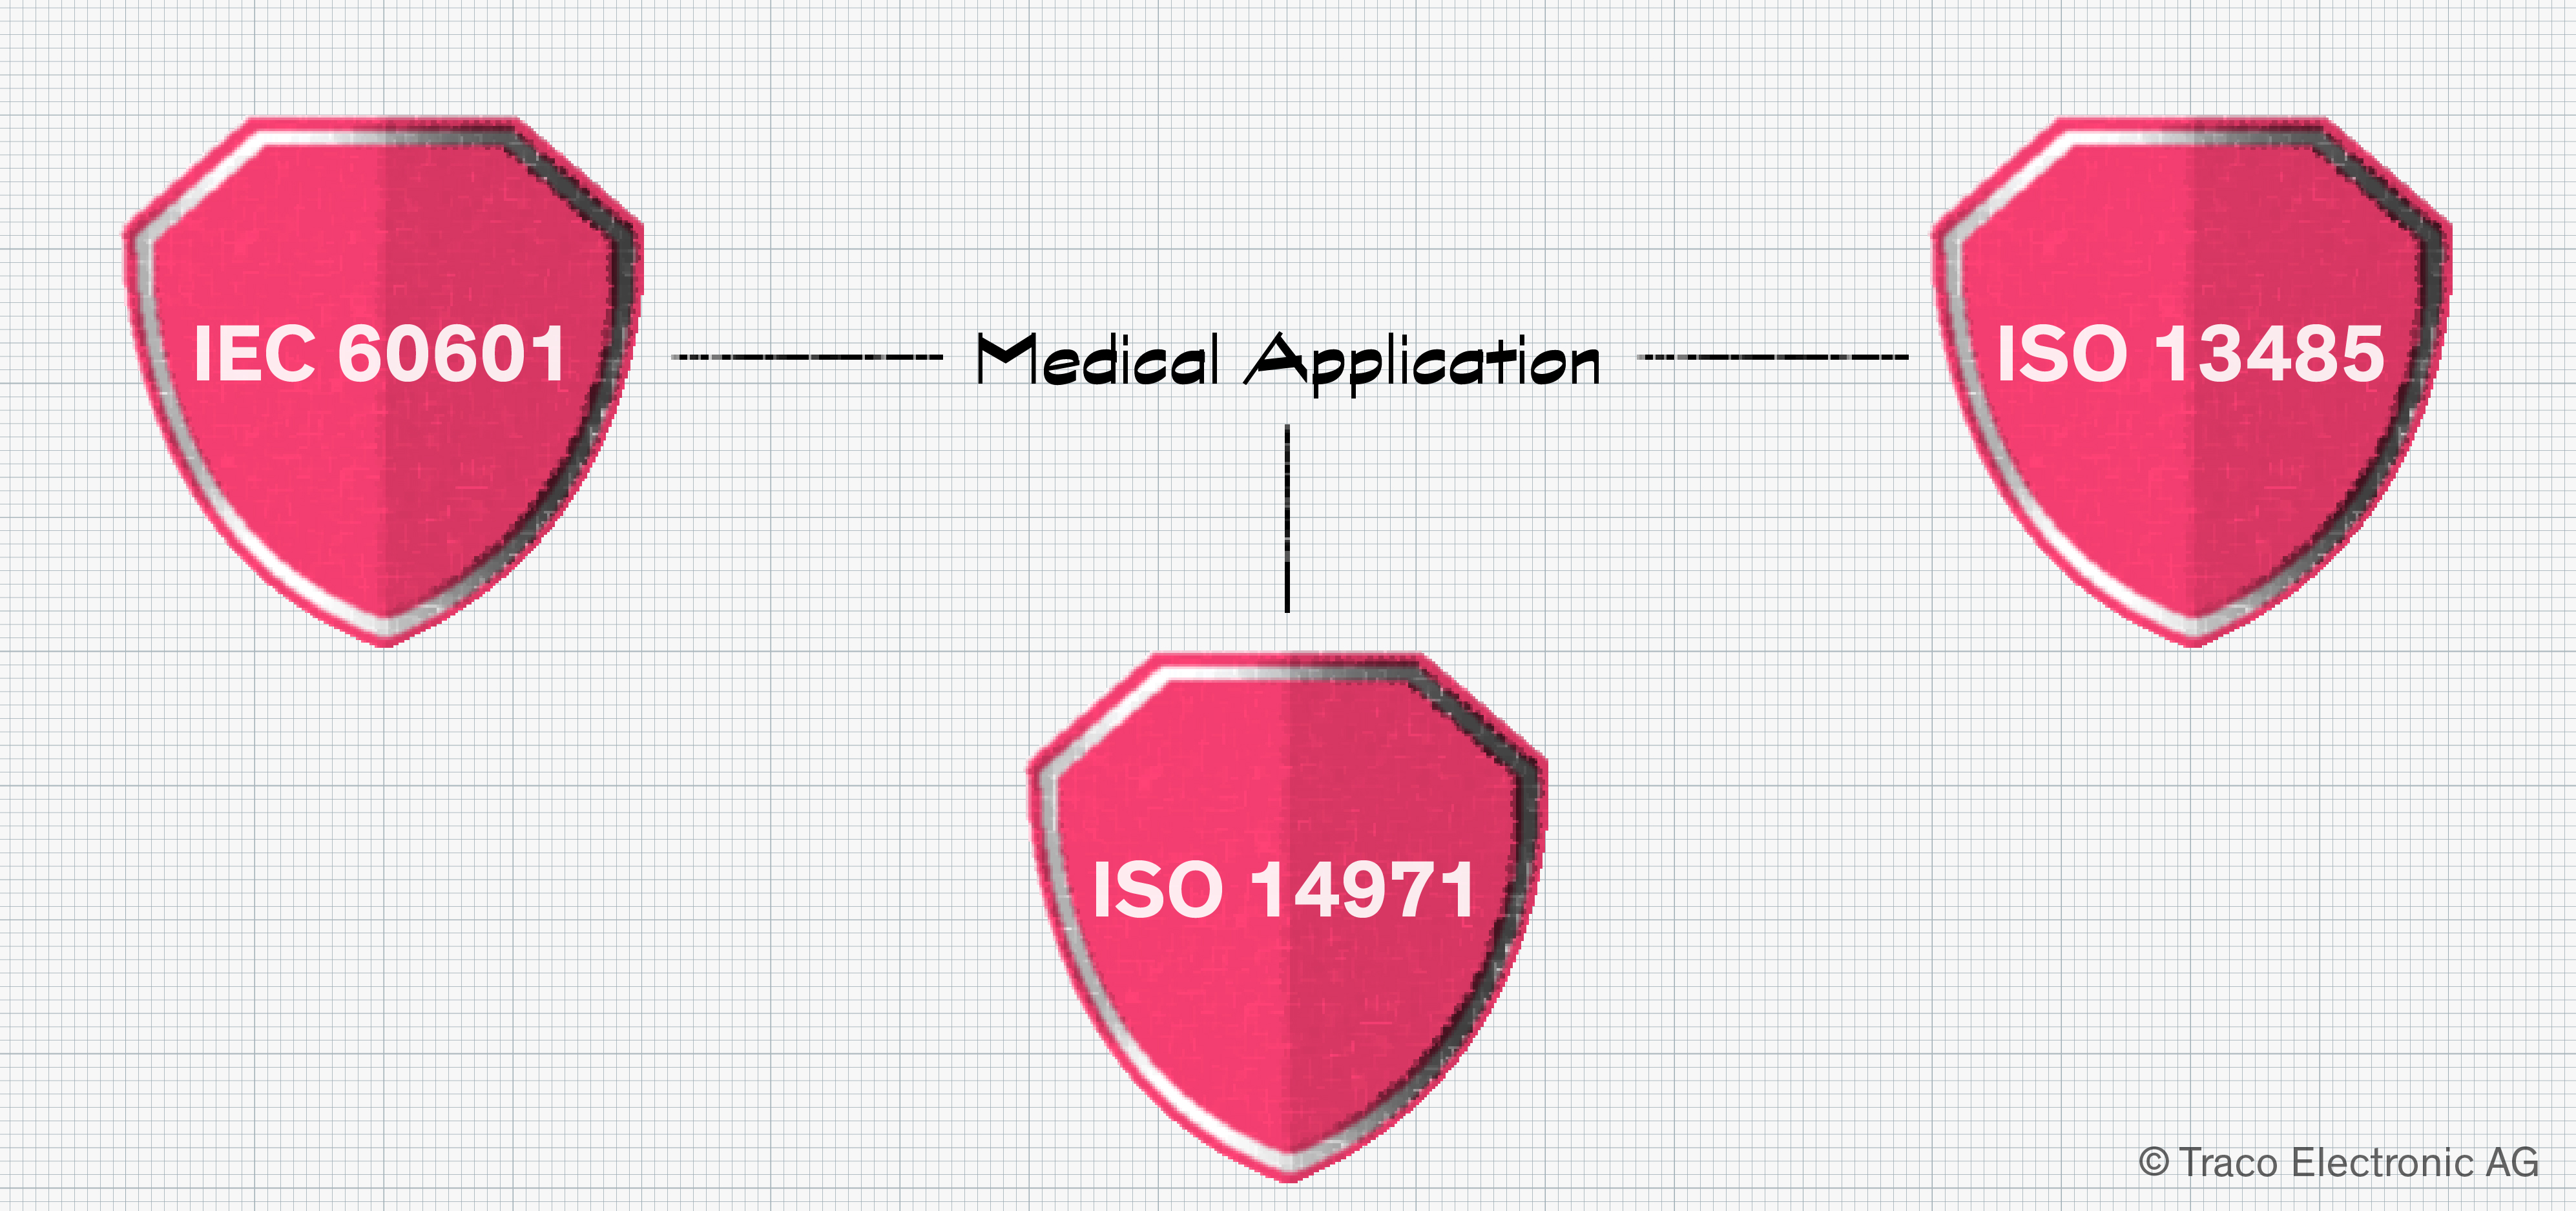 Safety in electrical and electronic medical applications relies on several standards. 